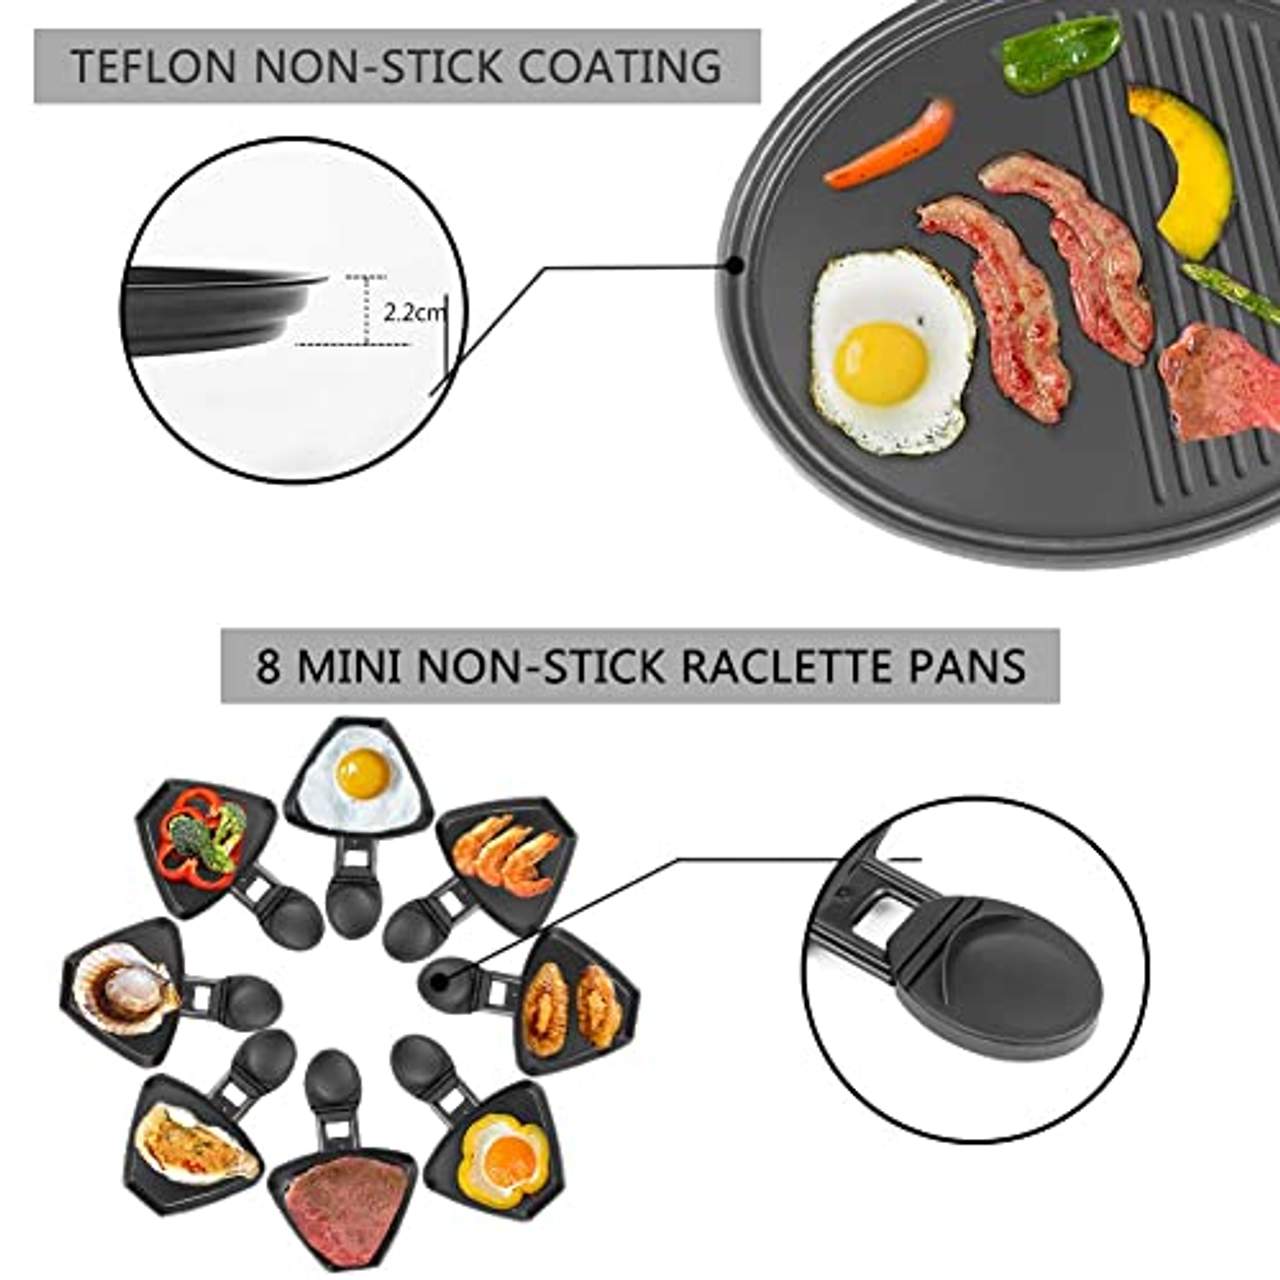 HENGB Raclette Grill 